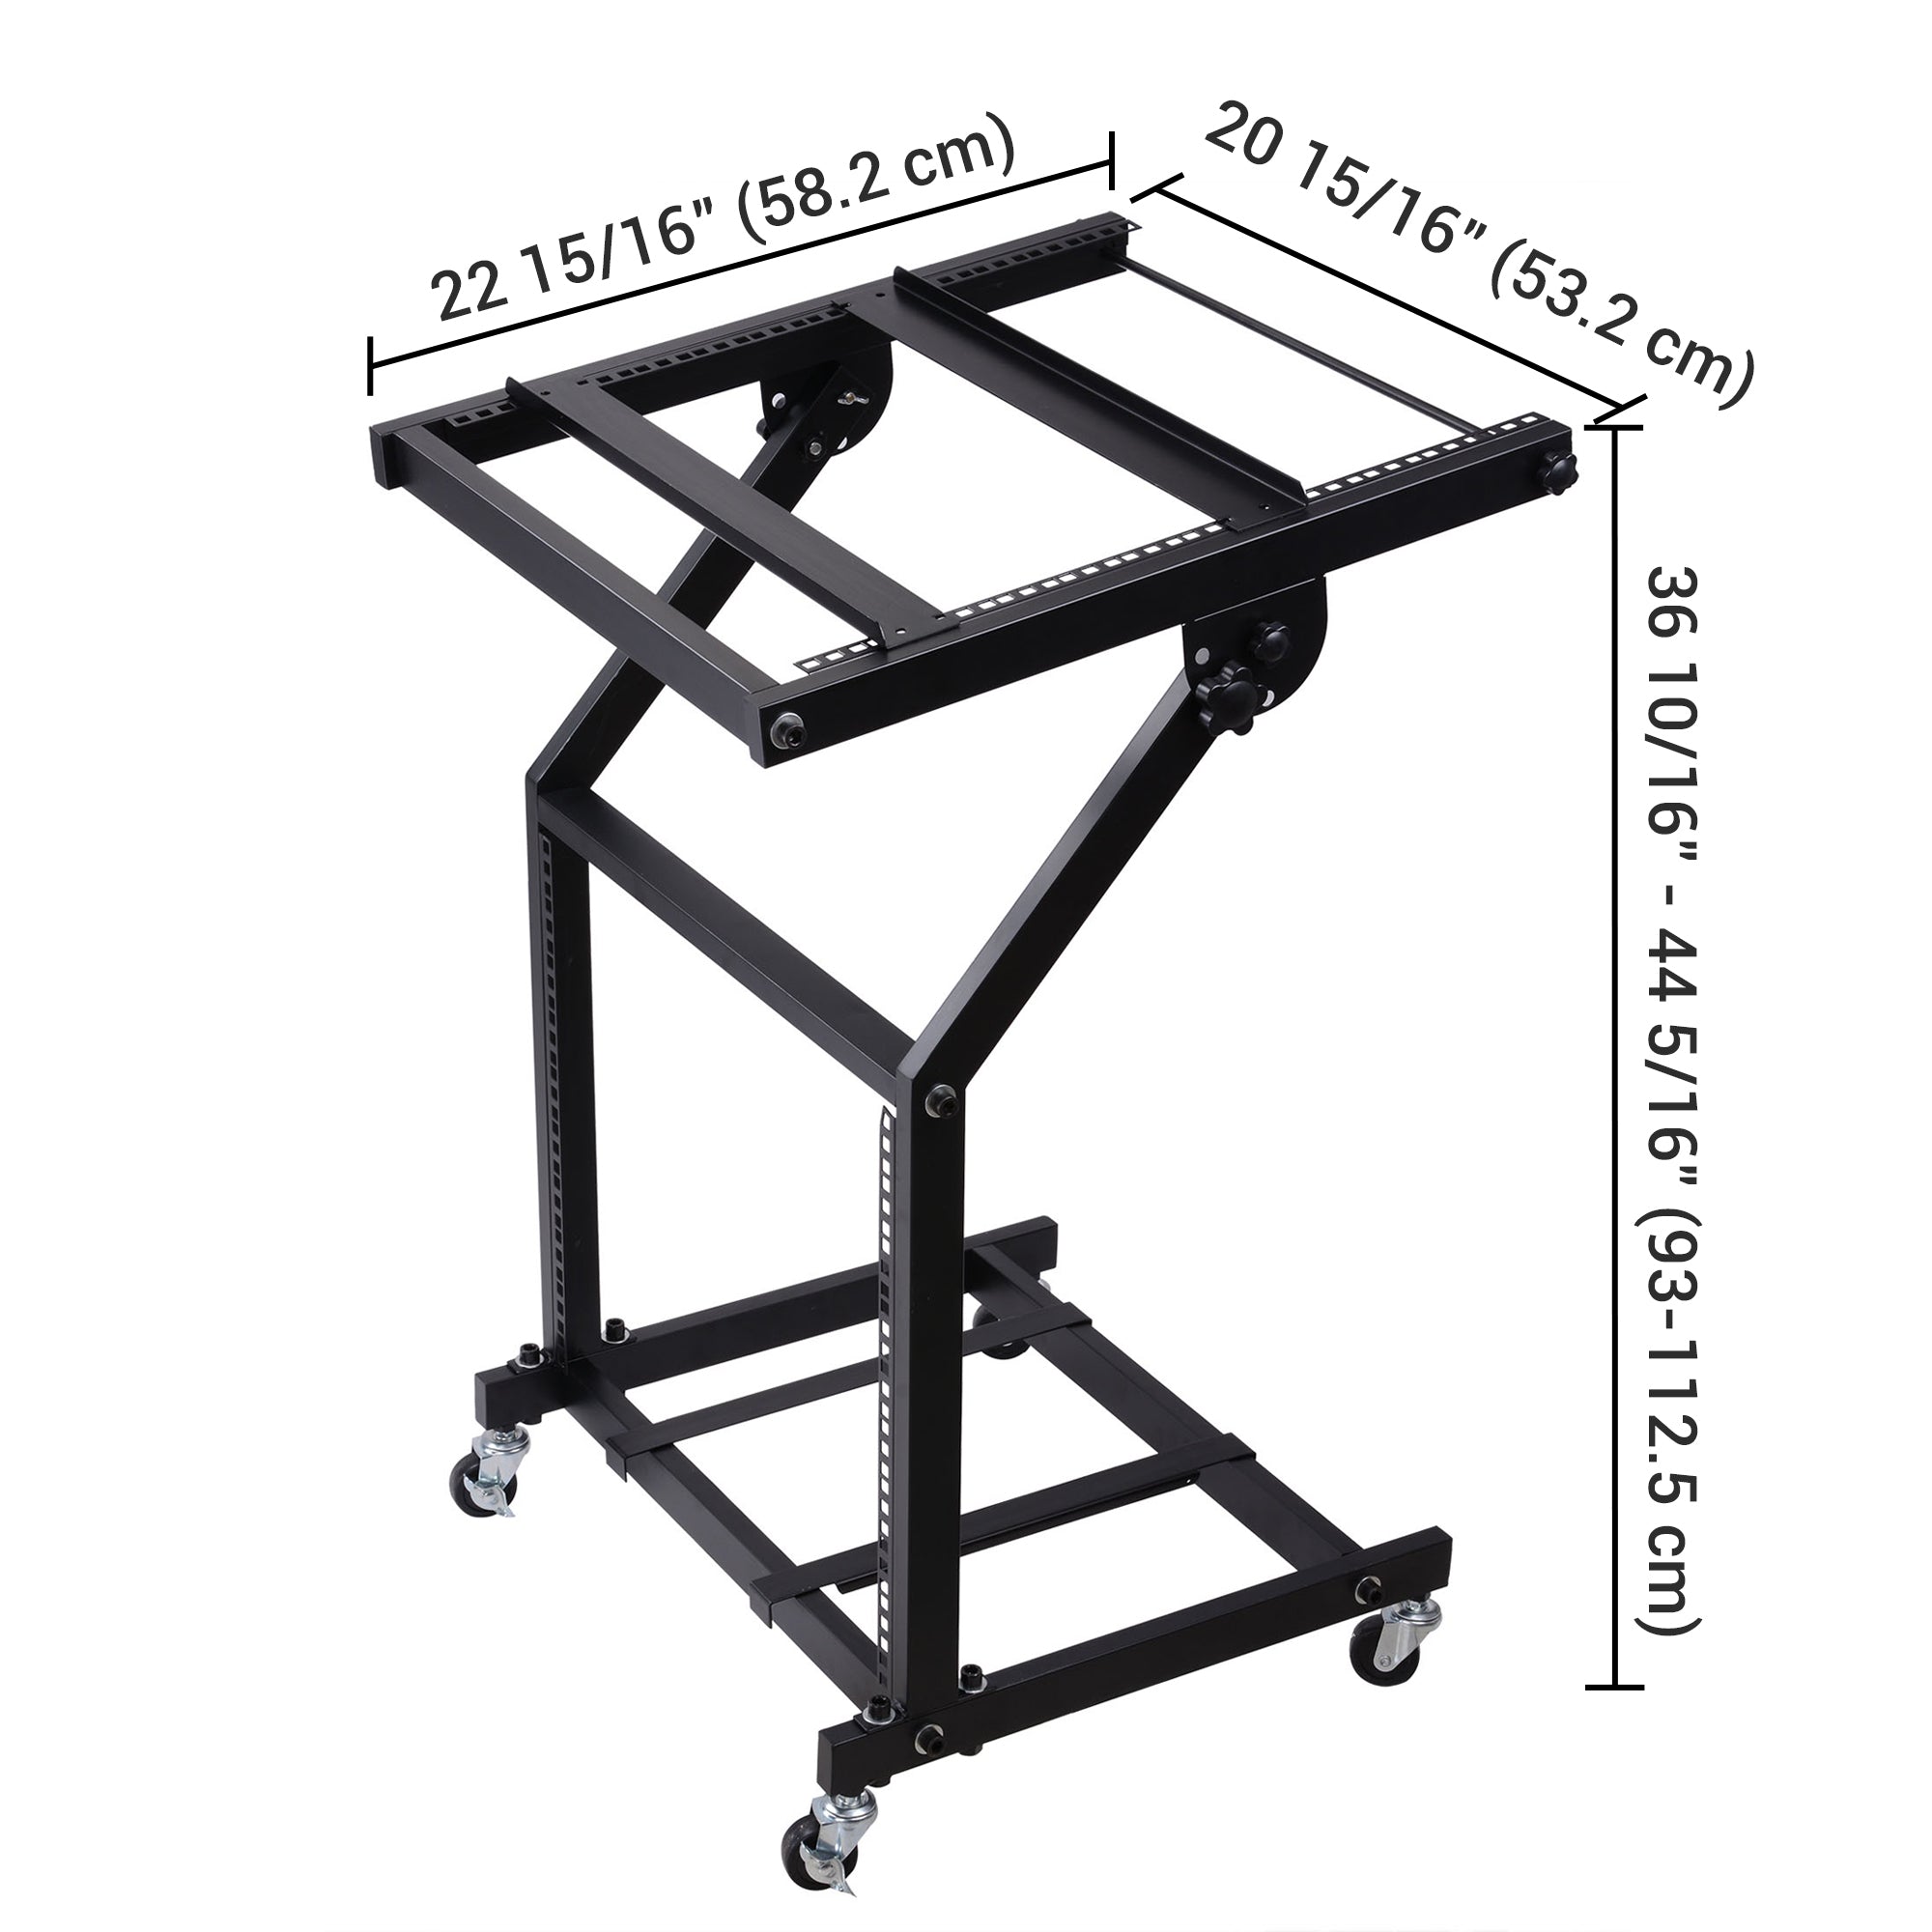 Yescom 19in 9U Stage Rolling Audio Mixer Stand Rack Cart w/ 4 Poles Image